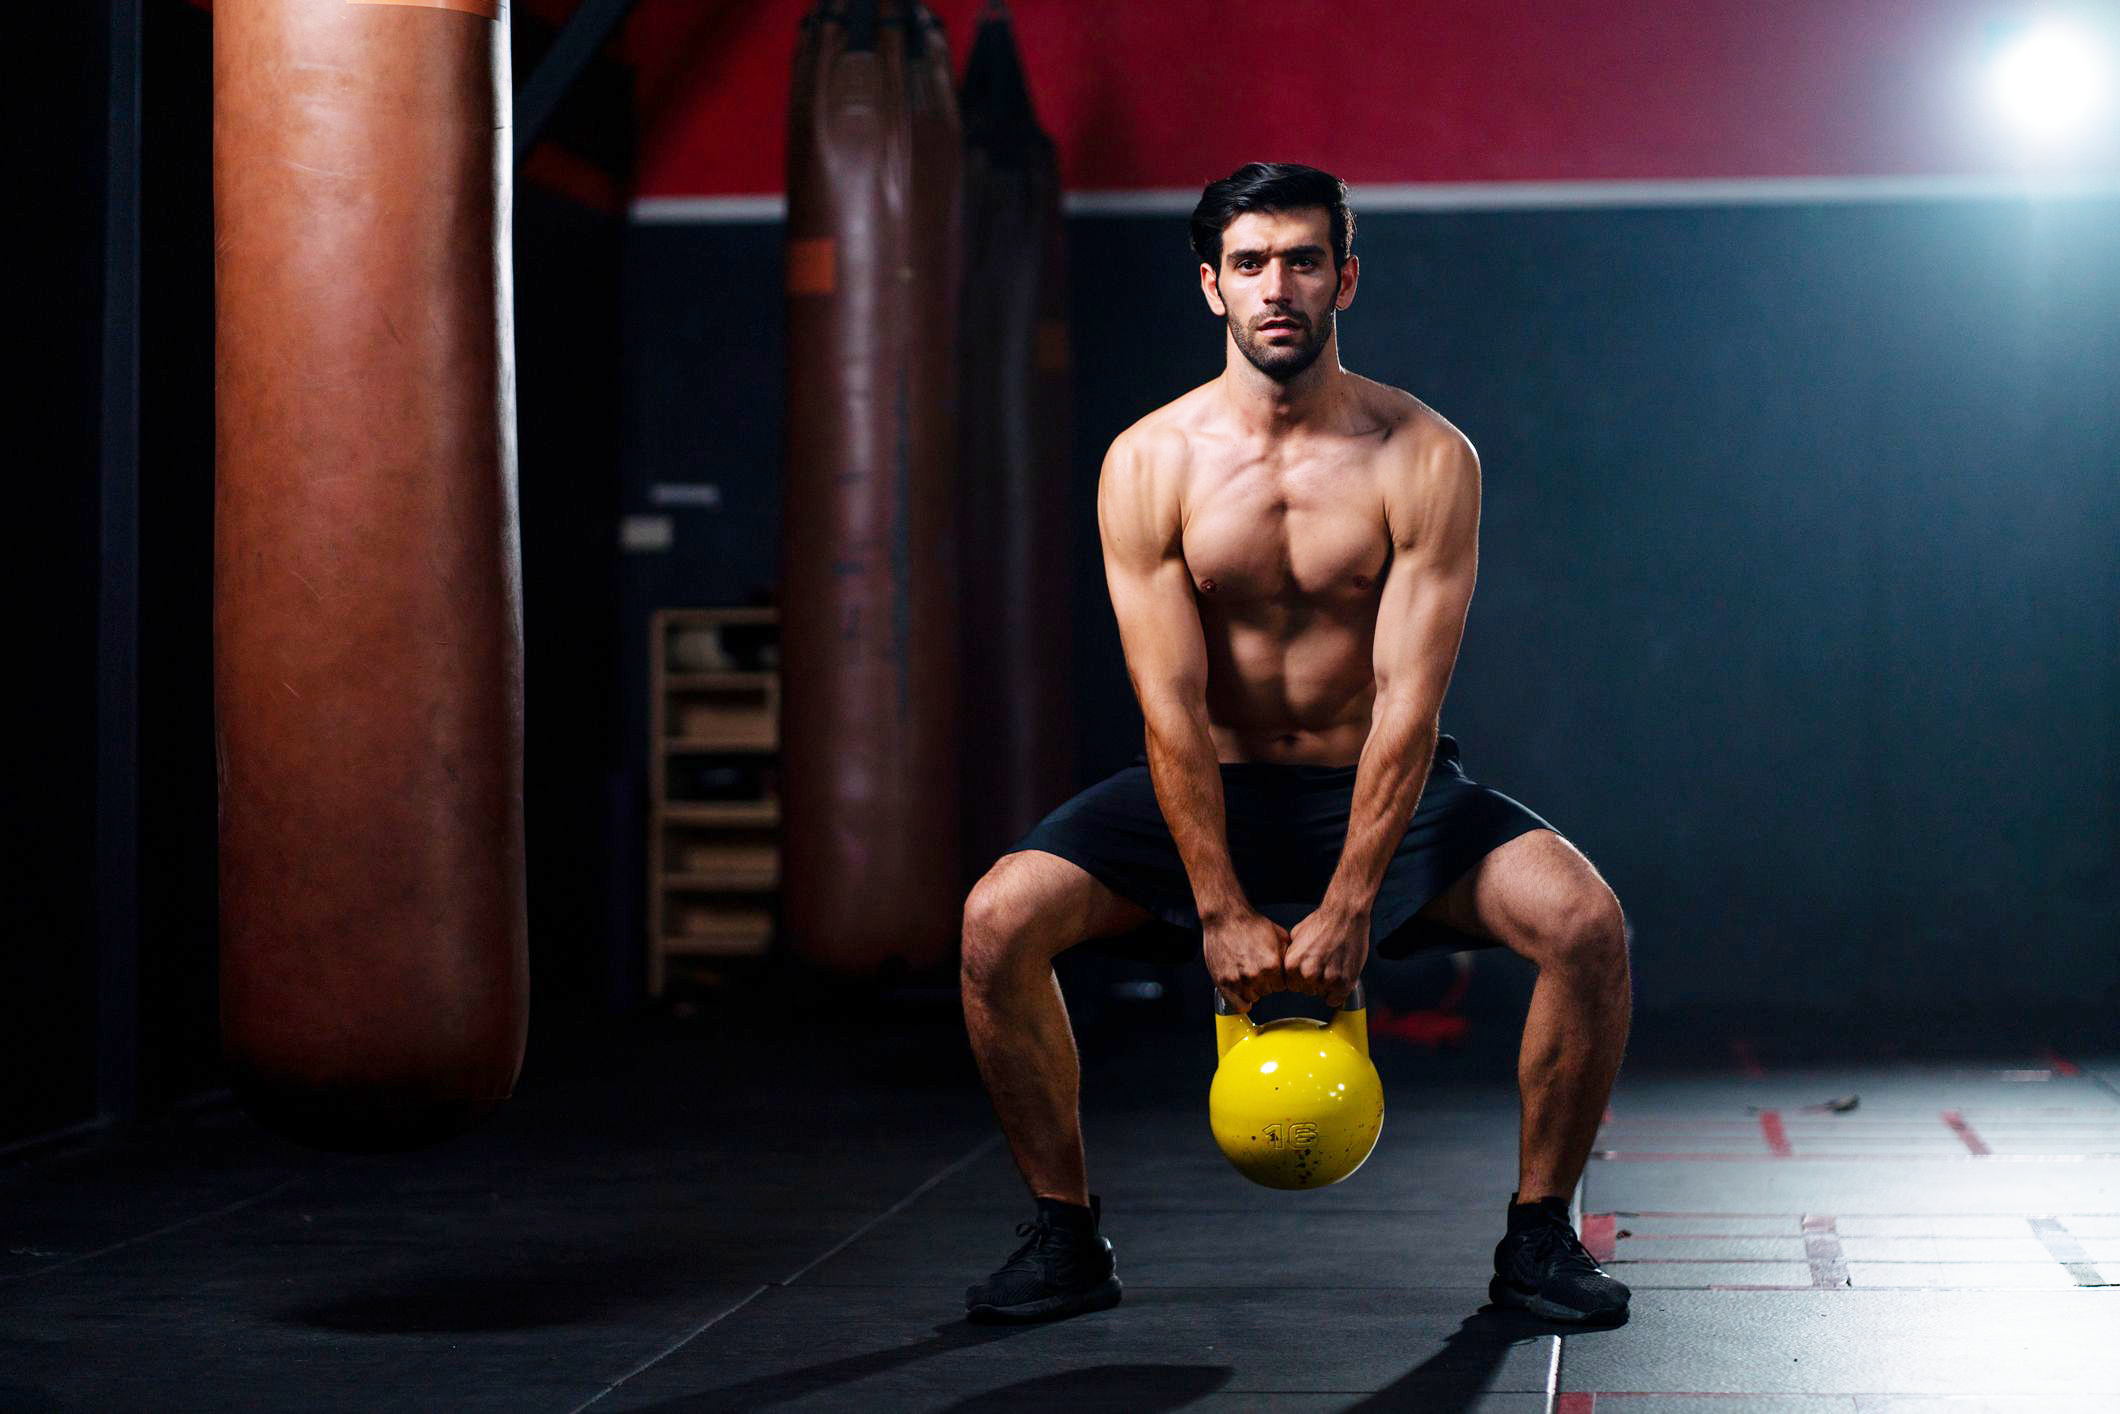 Risikabel coping lide 7 Fundamental Kettlebell Exercises for Beginners to Build Muscle